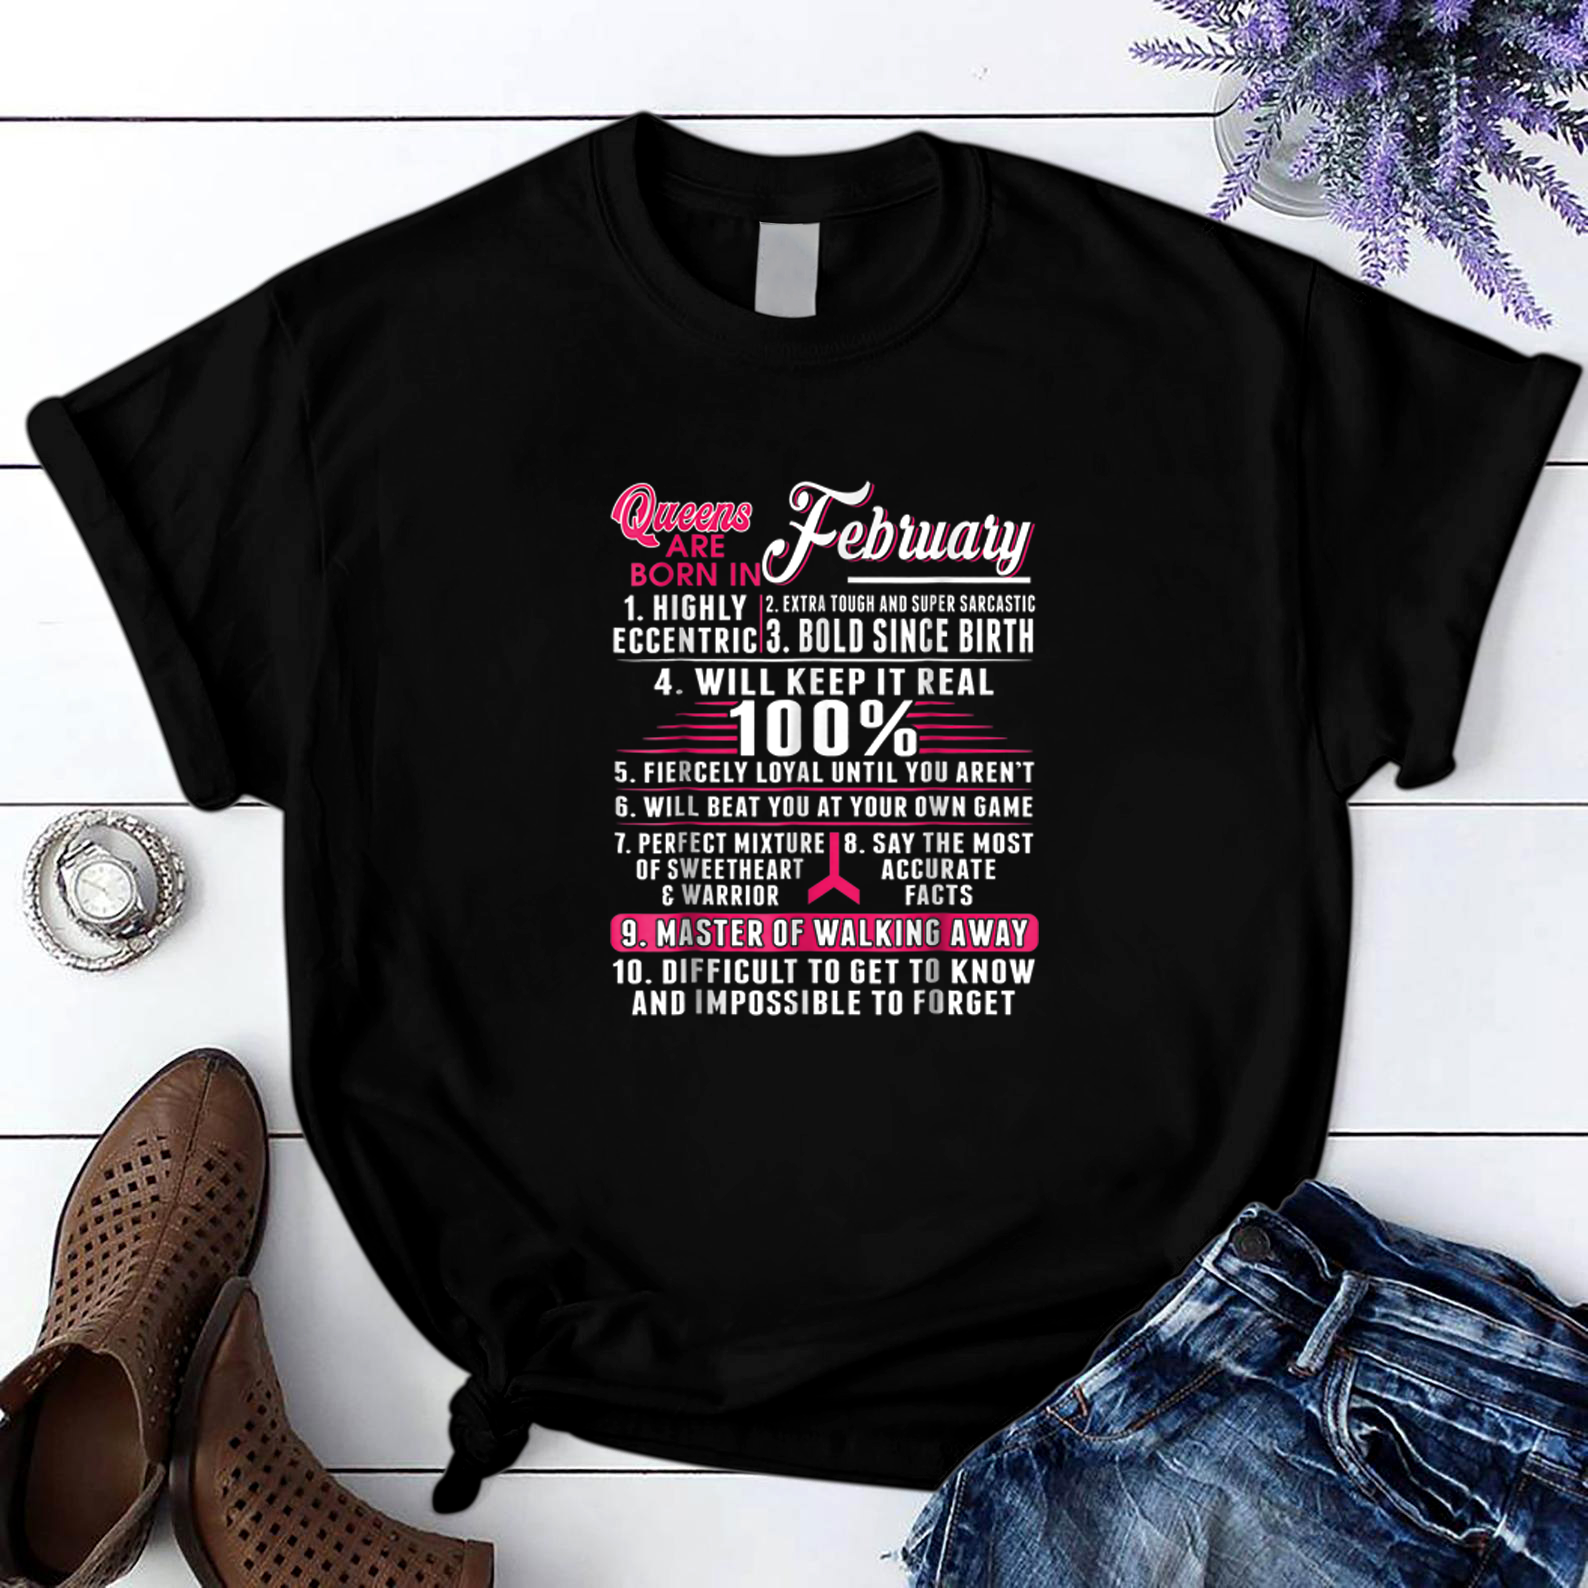 10 Queens Are Born In February Funny Birthday T Shirt Women S-3Xl